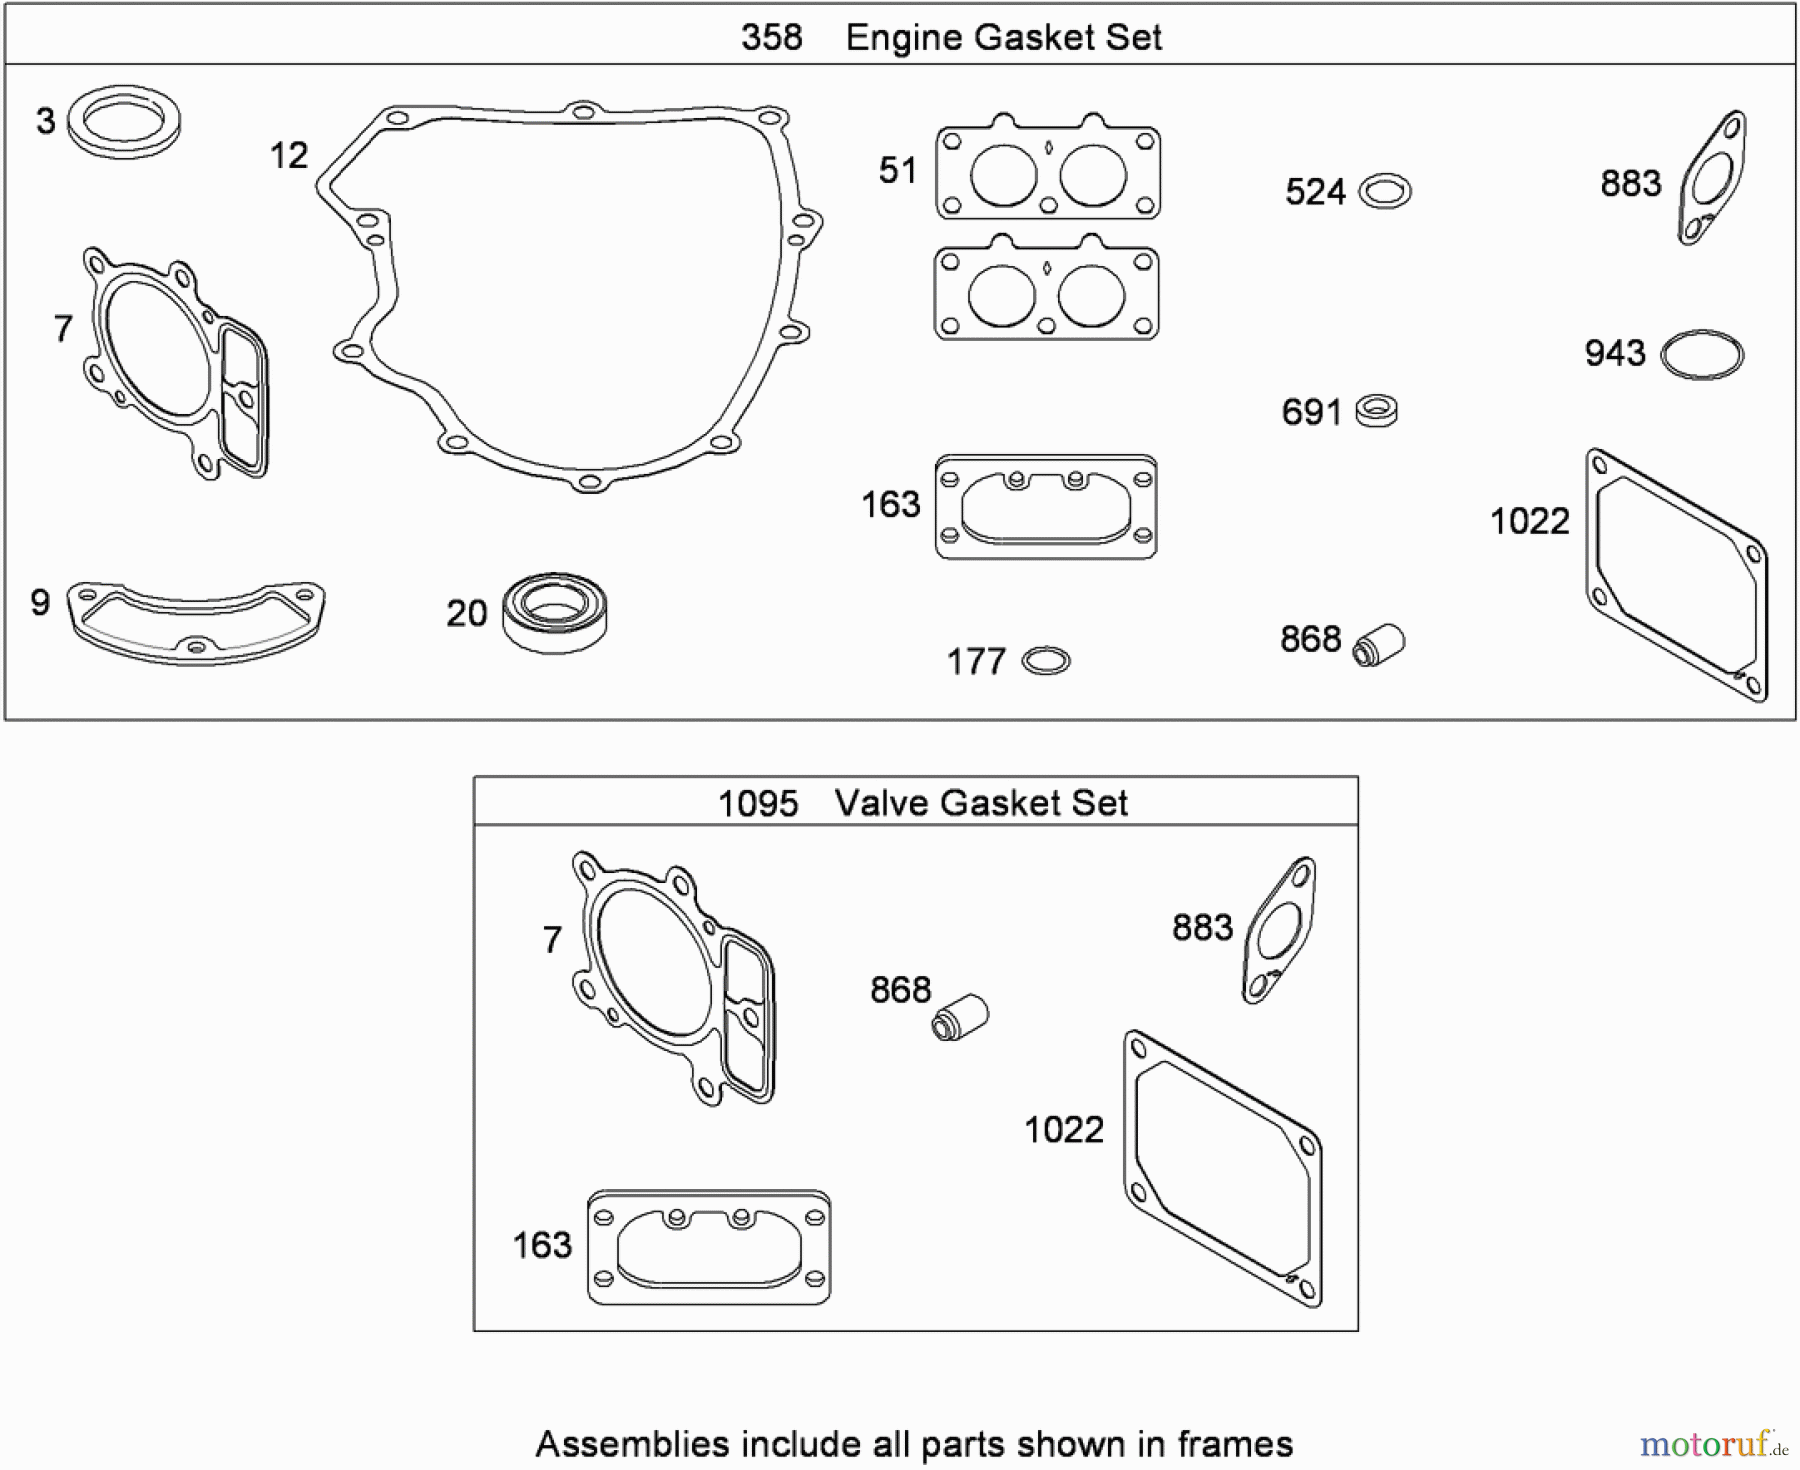  Toro Neu Mowers, Lawn & Garden Tractor Seite 1 13AT61RH544 (LX466) - Toro LX466 Lawn Tractor, 2008 (SN 1-) ENGINE AND VALVE GASKET SETS BRIGGS AND STRATTON 407777-0550-B1